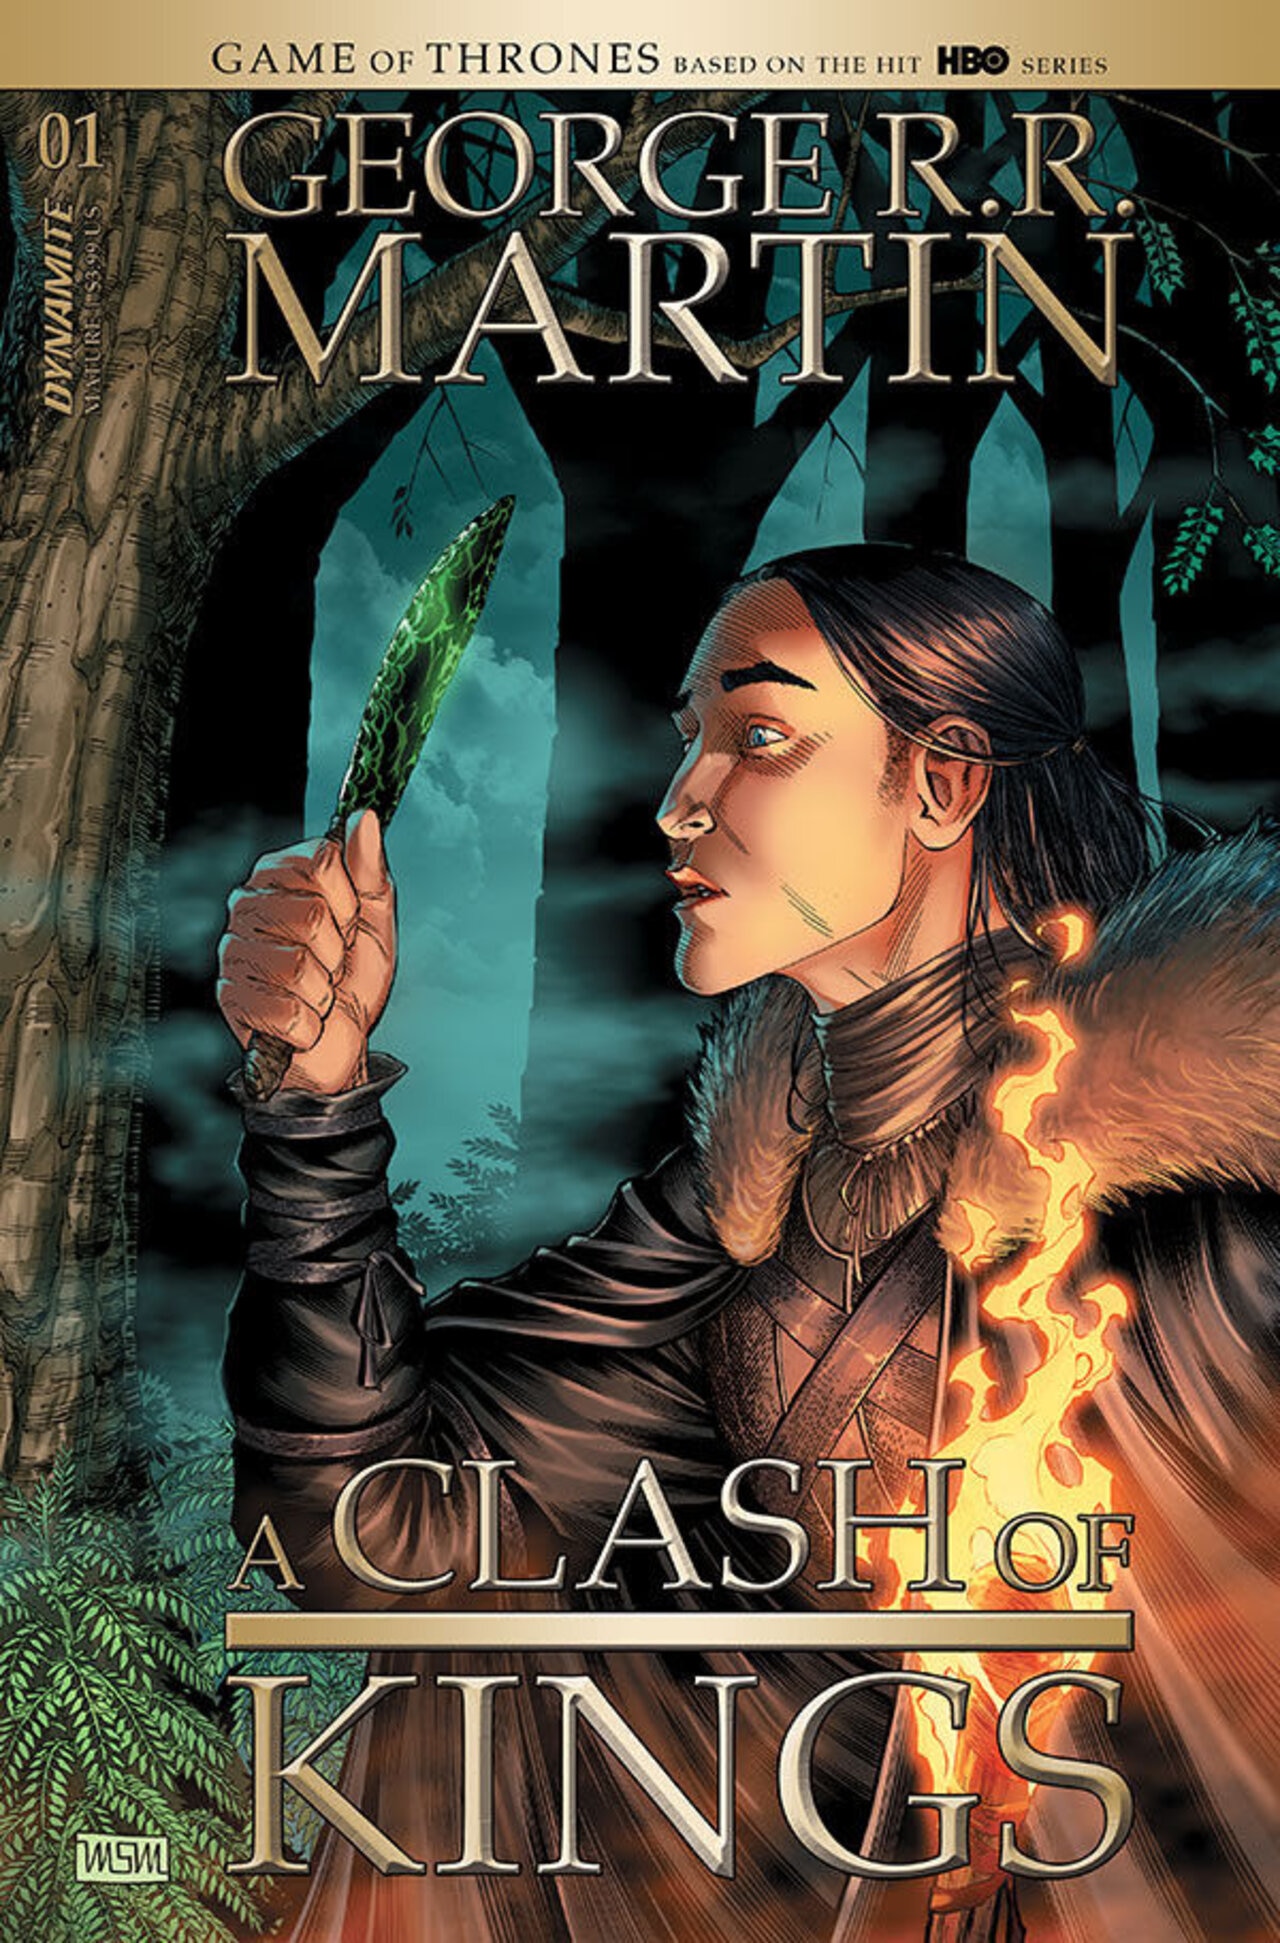 A Clash of Kings: Graphic Novel, Volume 4 by George R.R. Martin